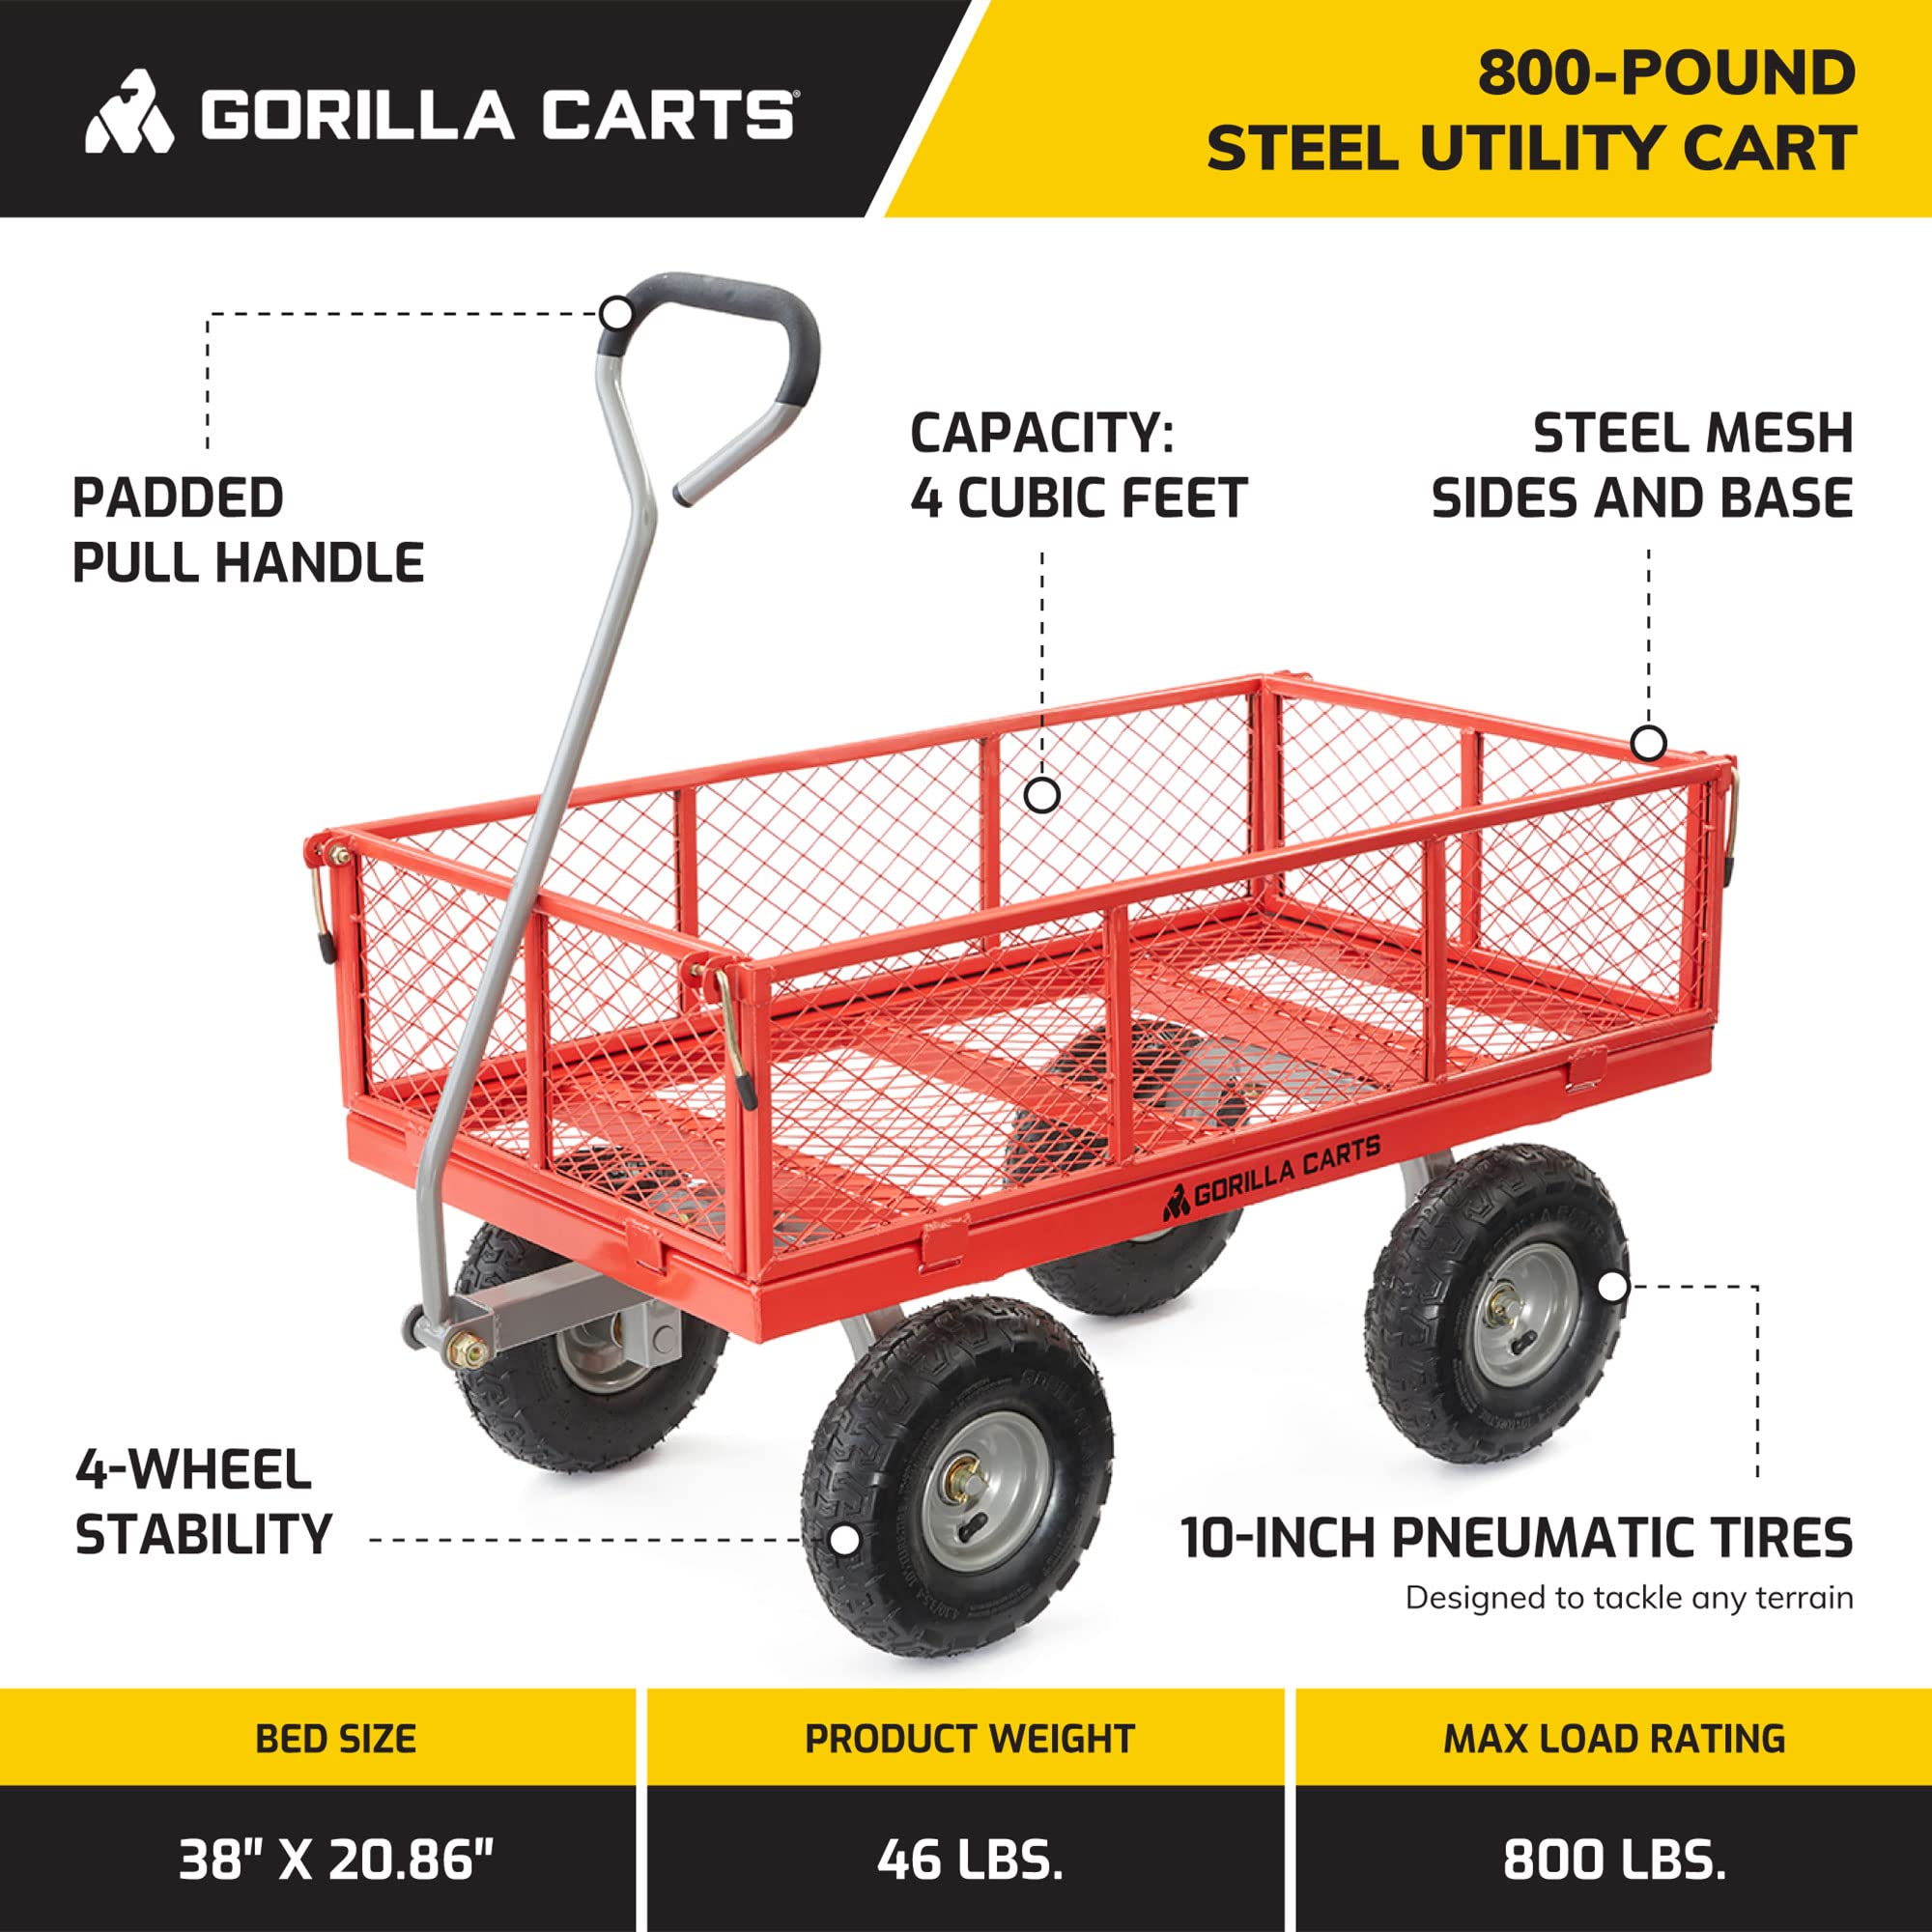 Gorilla Carts 800 Pound Capacity Heavy Duty Steel Mesh Versatile Utility Wagon Cart - $88.39 after 20% instant coupon